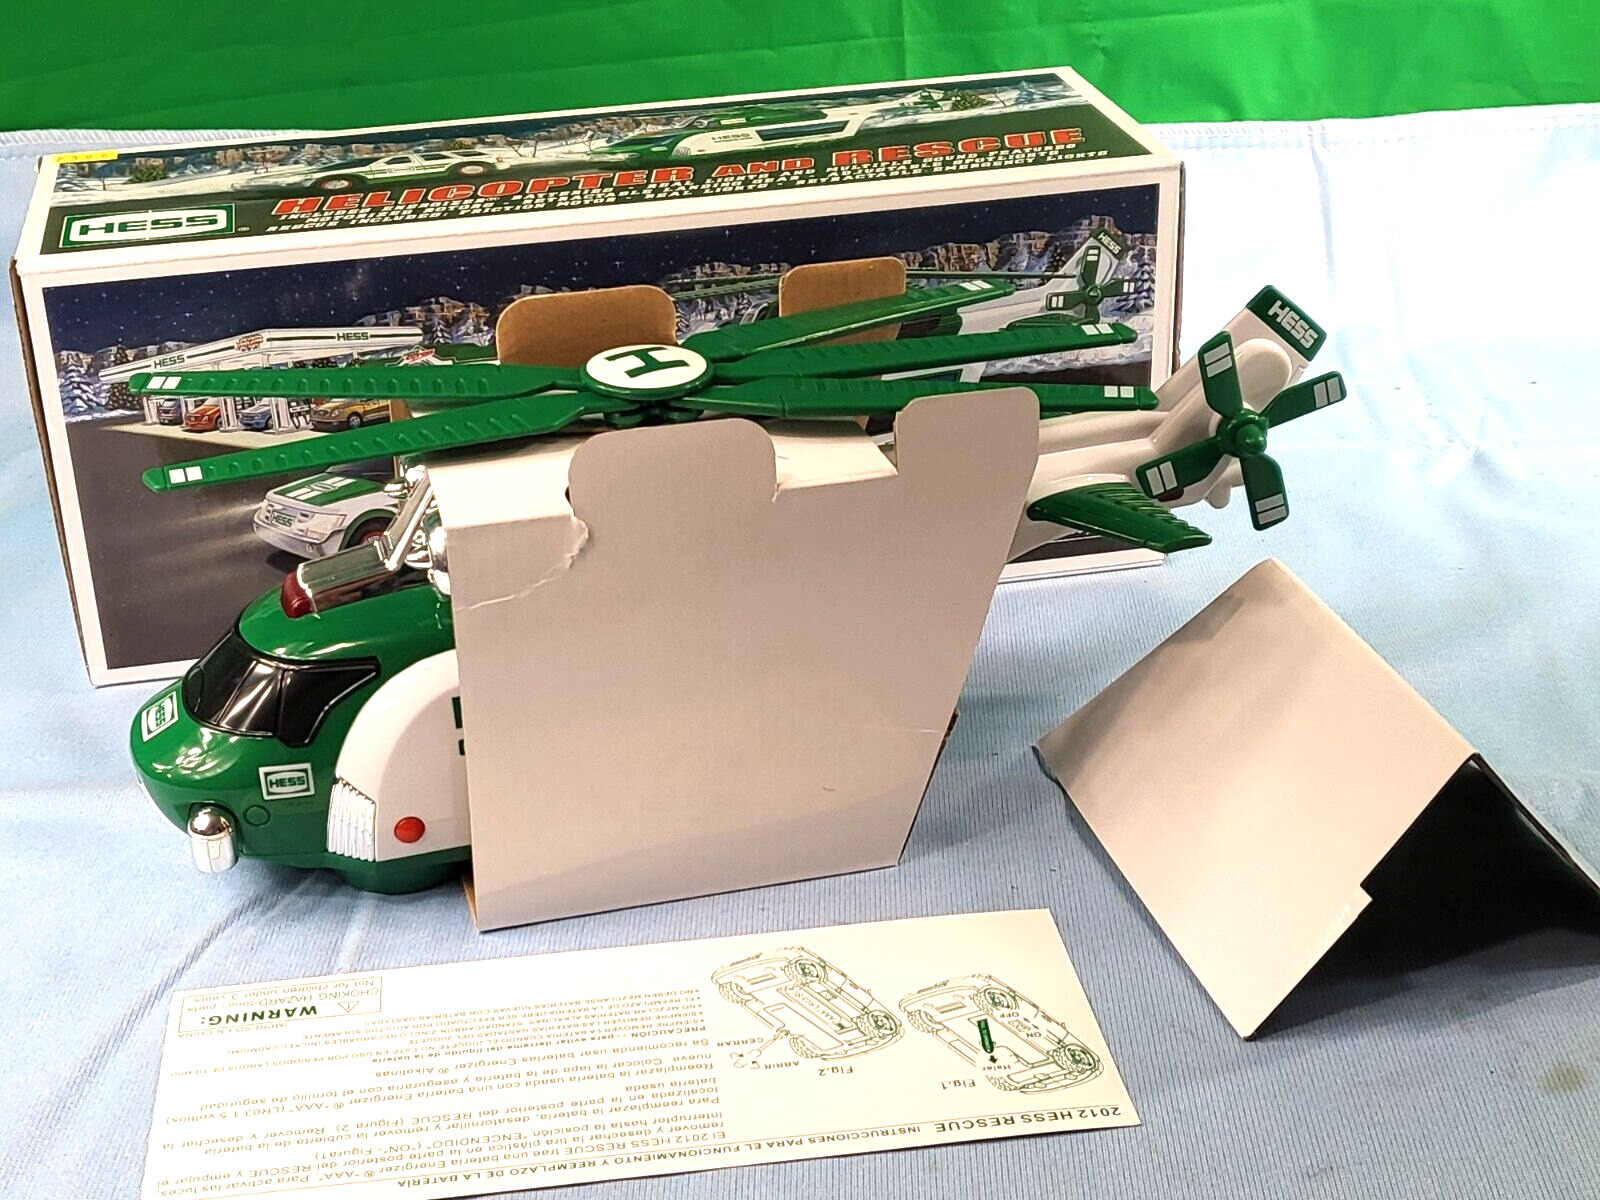 2013 Hess Helicopter & Rescue -  With Inserts  New In Box